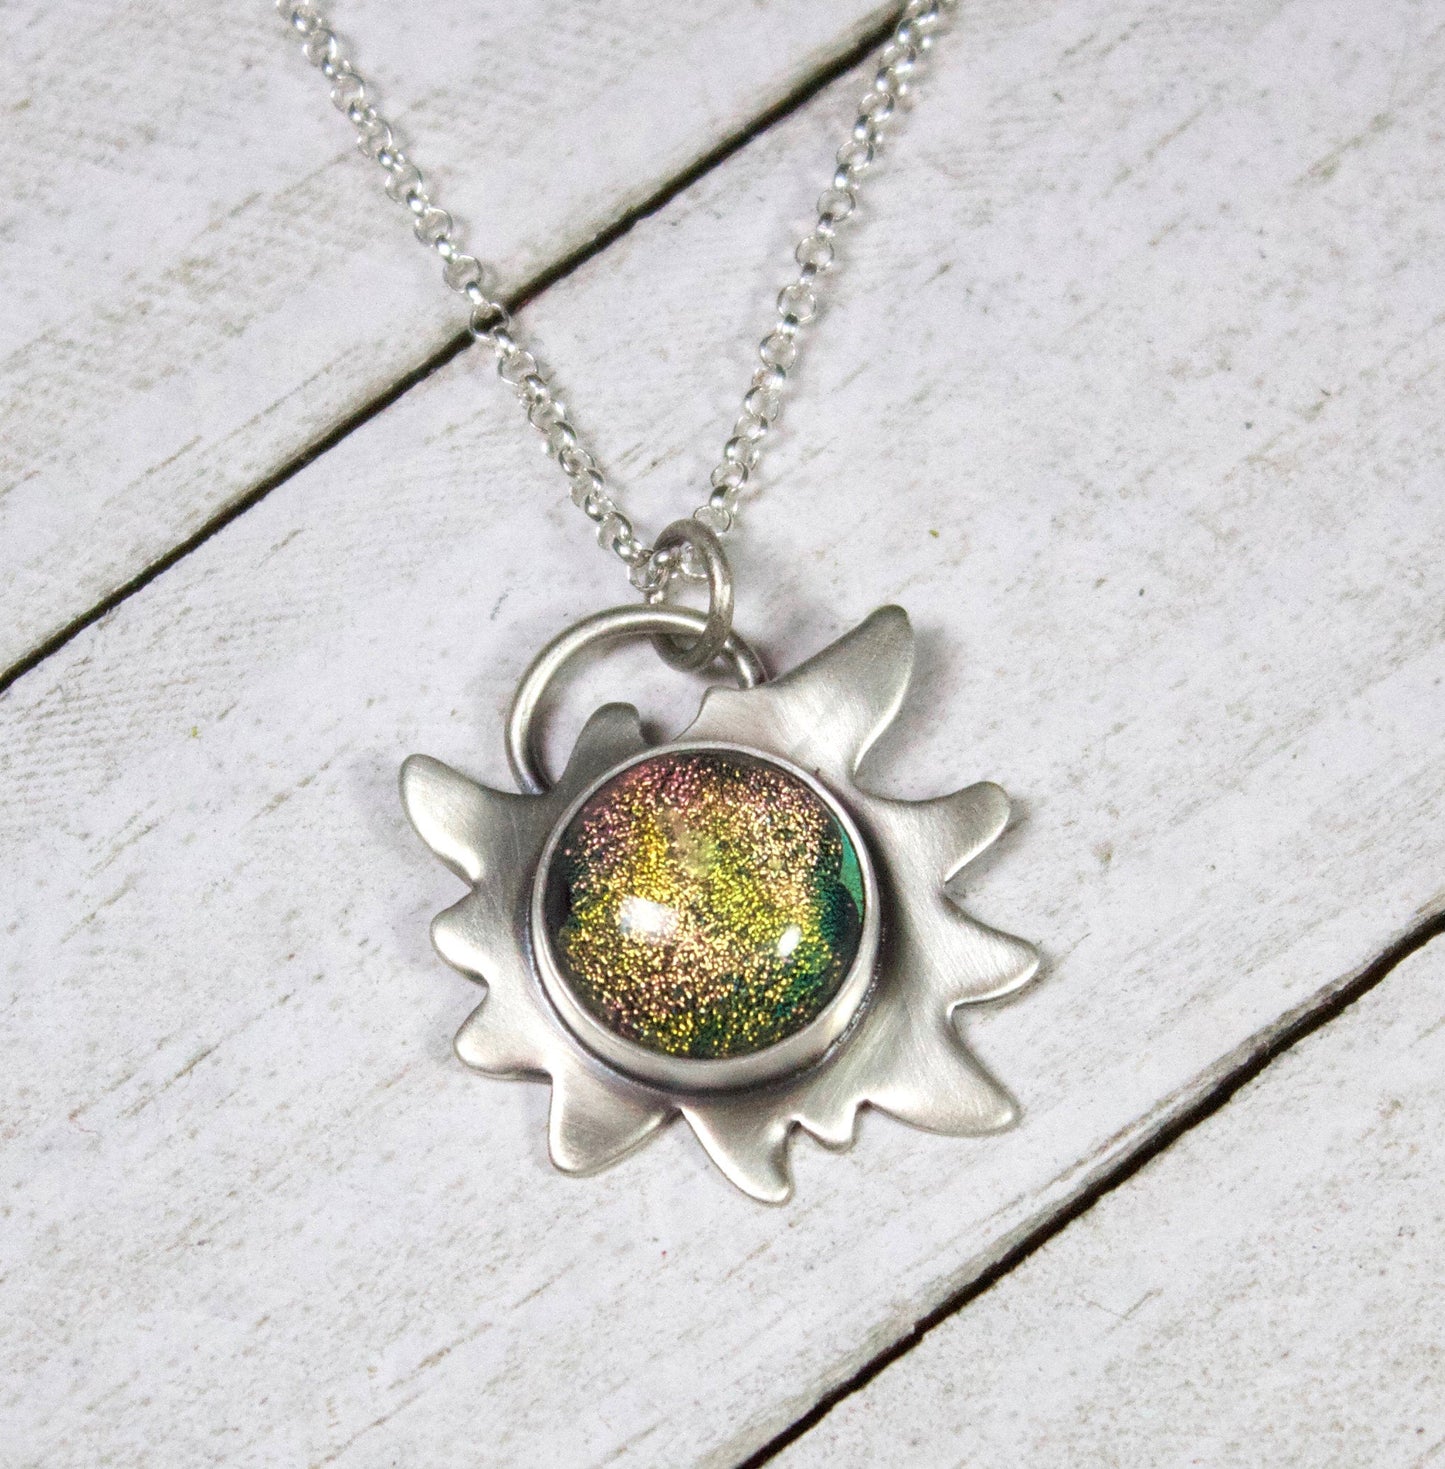 Edelweiss Flower Glass Stone Galaxy Pendant. This a one inch wide pendant made in sterling silver. The center is dichroic glass with sparkling bits in a golden color. The silver is shoped like an edelweiss flower. The sterling silver pendant comes on a rolo chain.